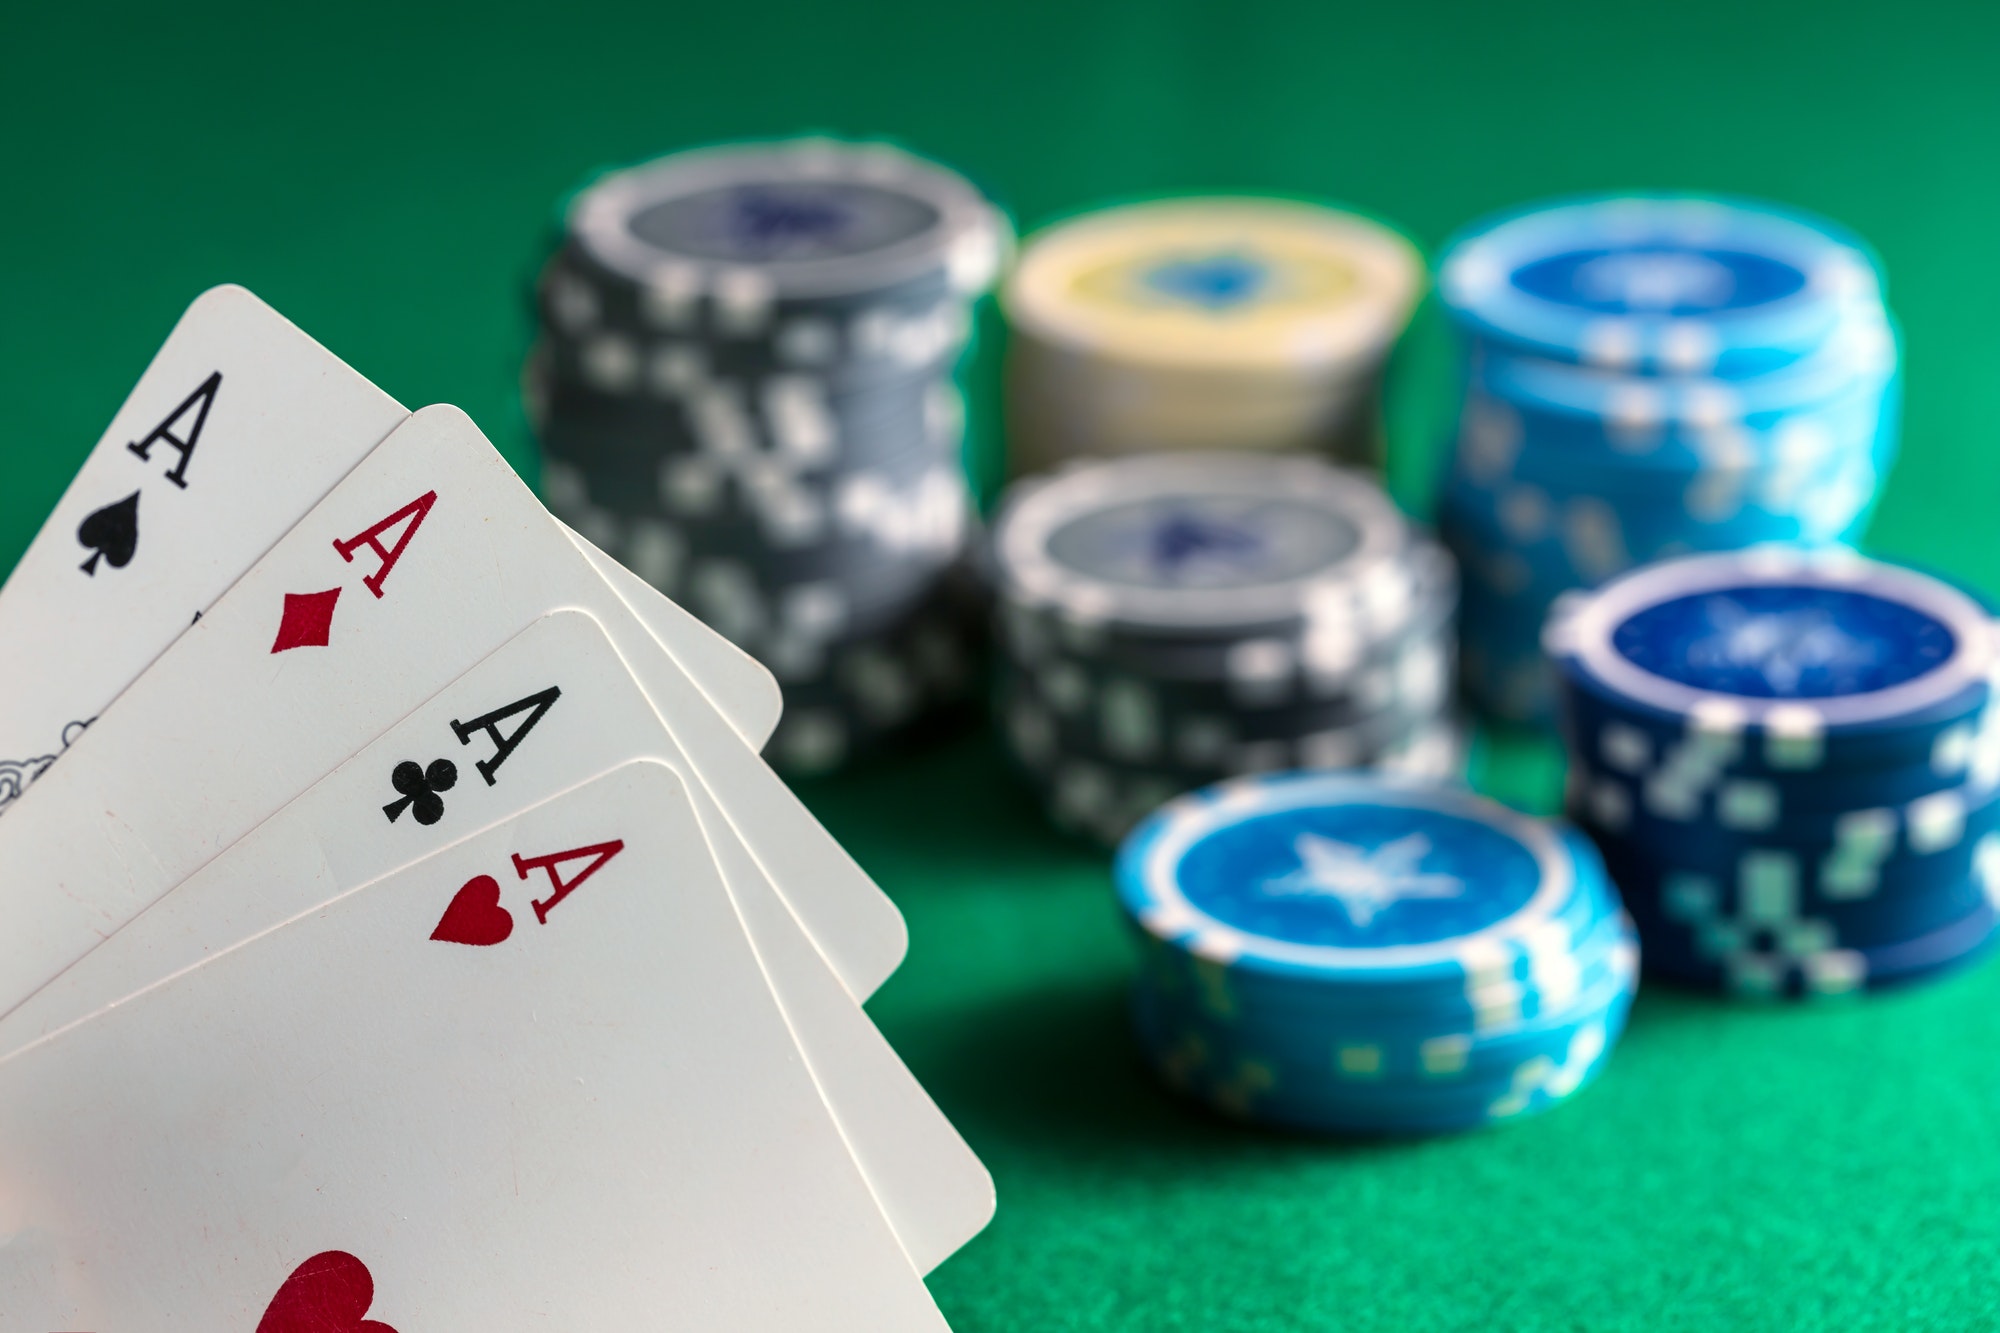 Online poker is a way more accessible and chosen option than land-based poker